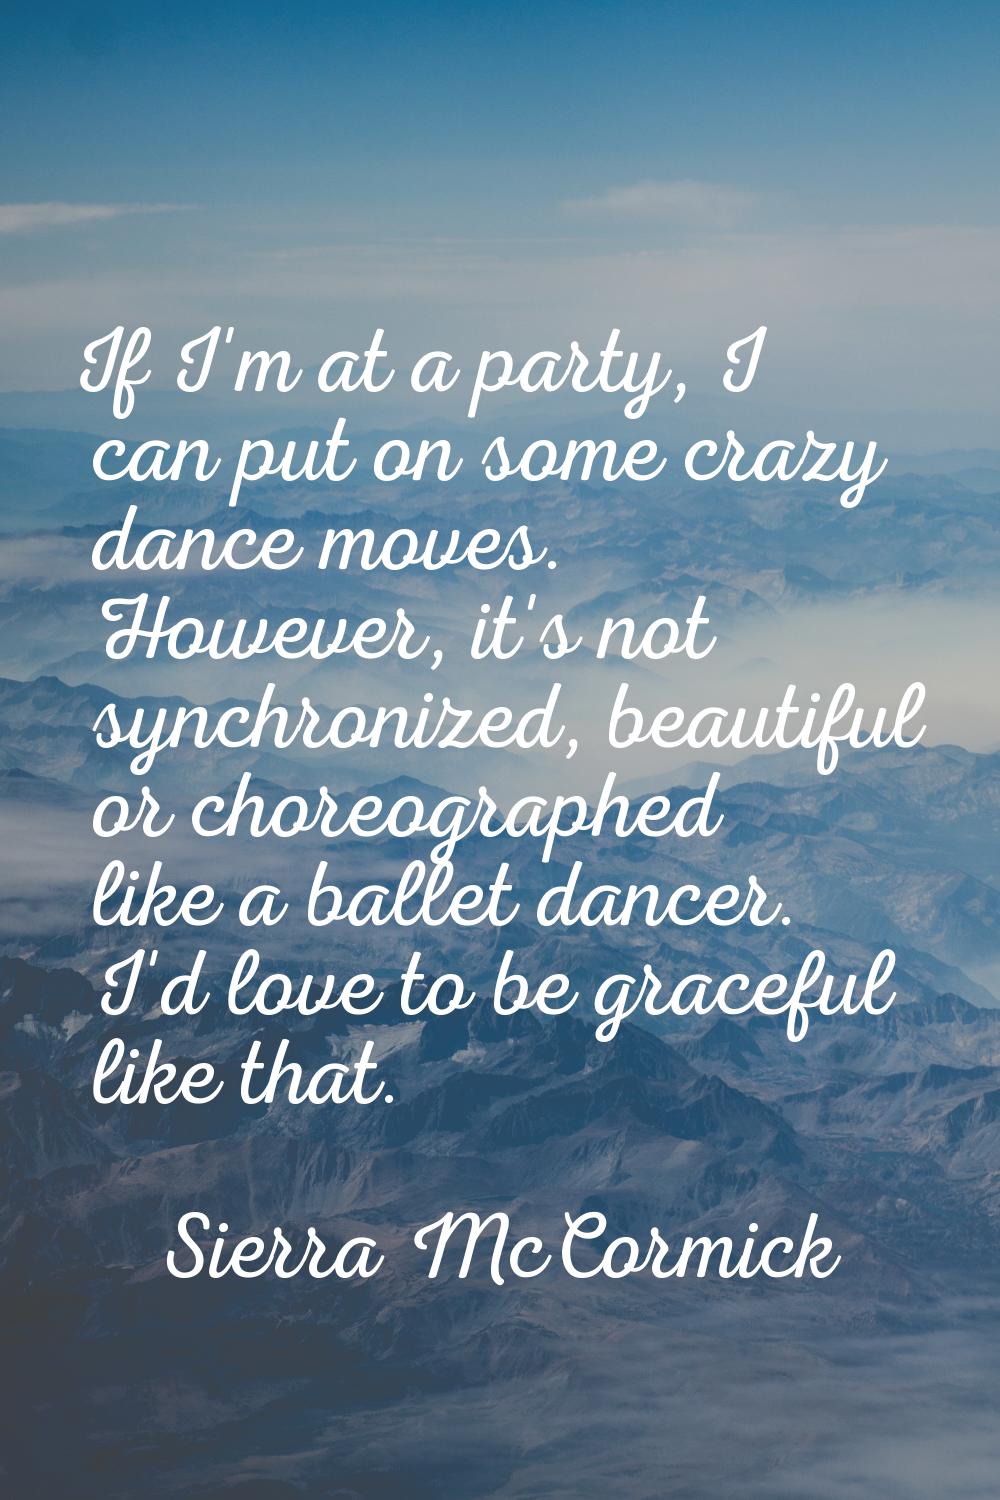 If I'm at a party, I can put on some crazy dance moves. However, it's not synchronized, beautiful o